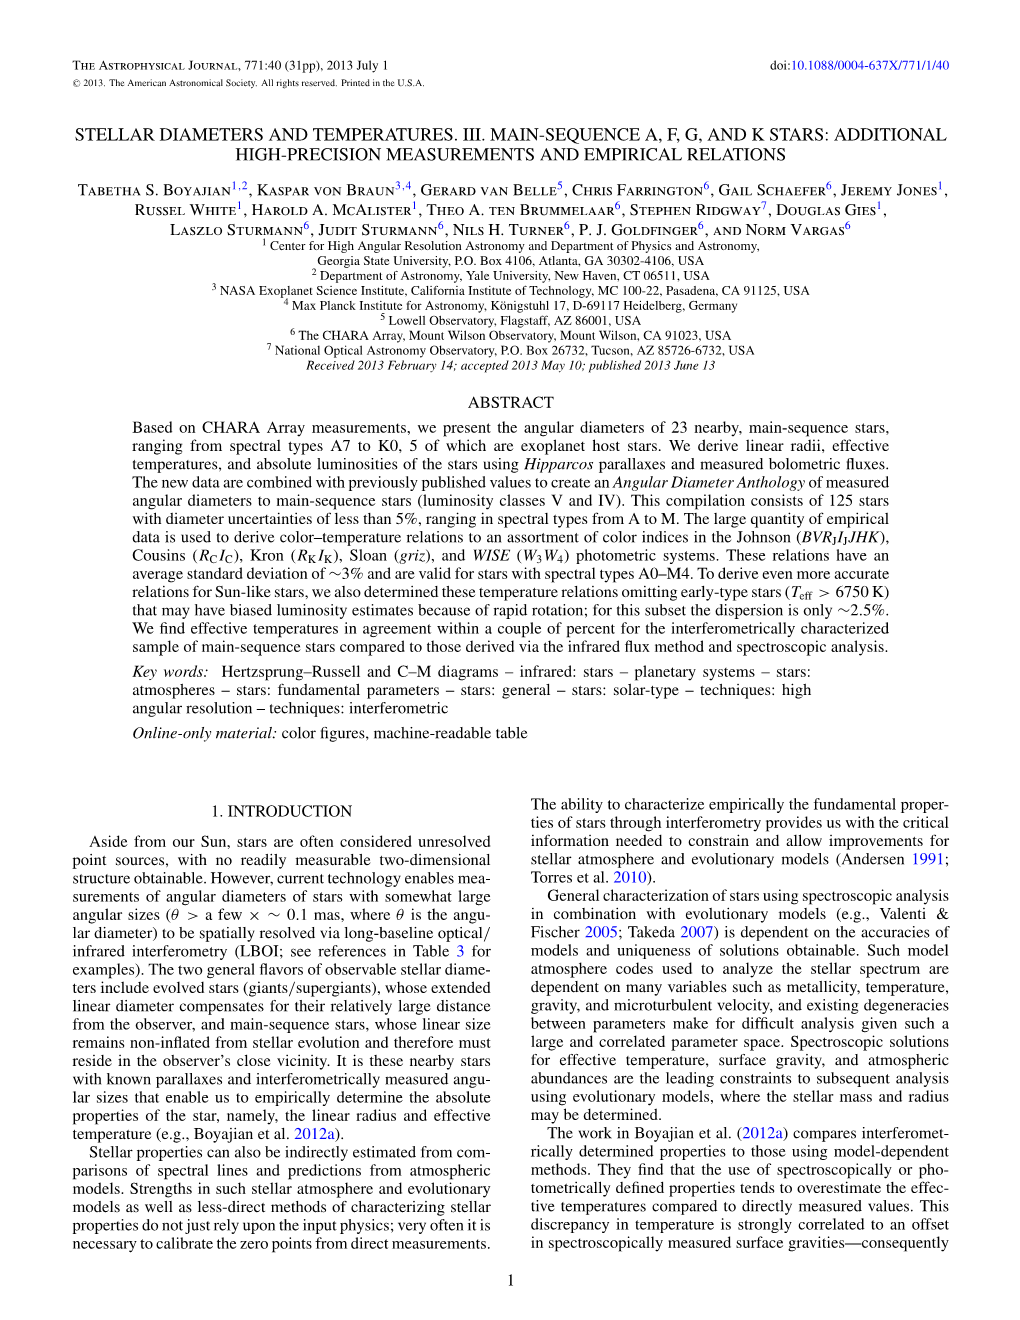 Stellar Diameters and Temperatures. Iii. Main-Sequence A, F, G, and K Stars: Additional High-Precision Measurements and Empirical Relations